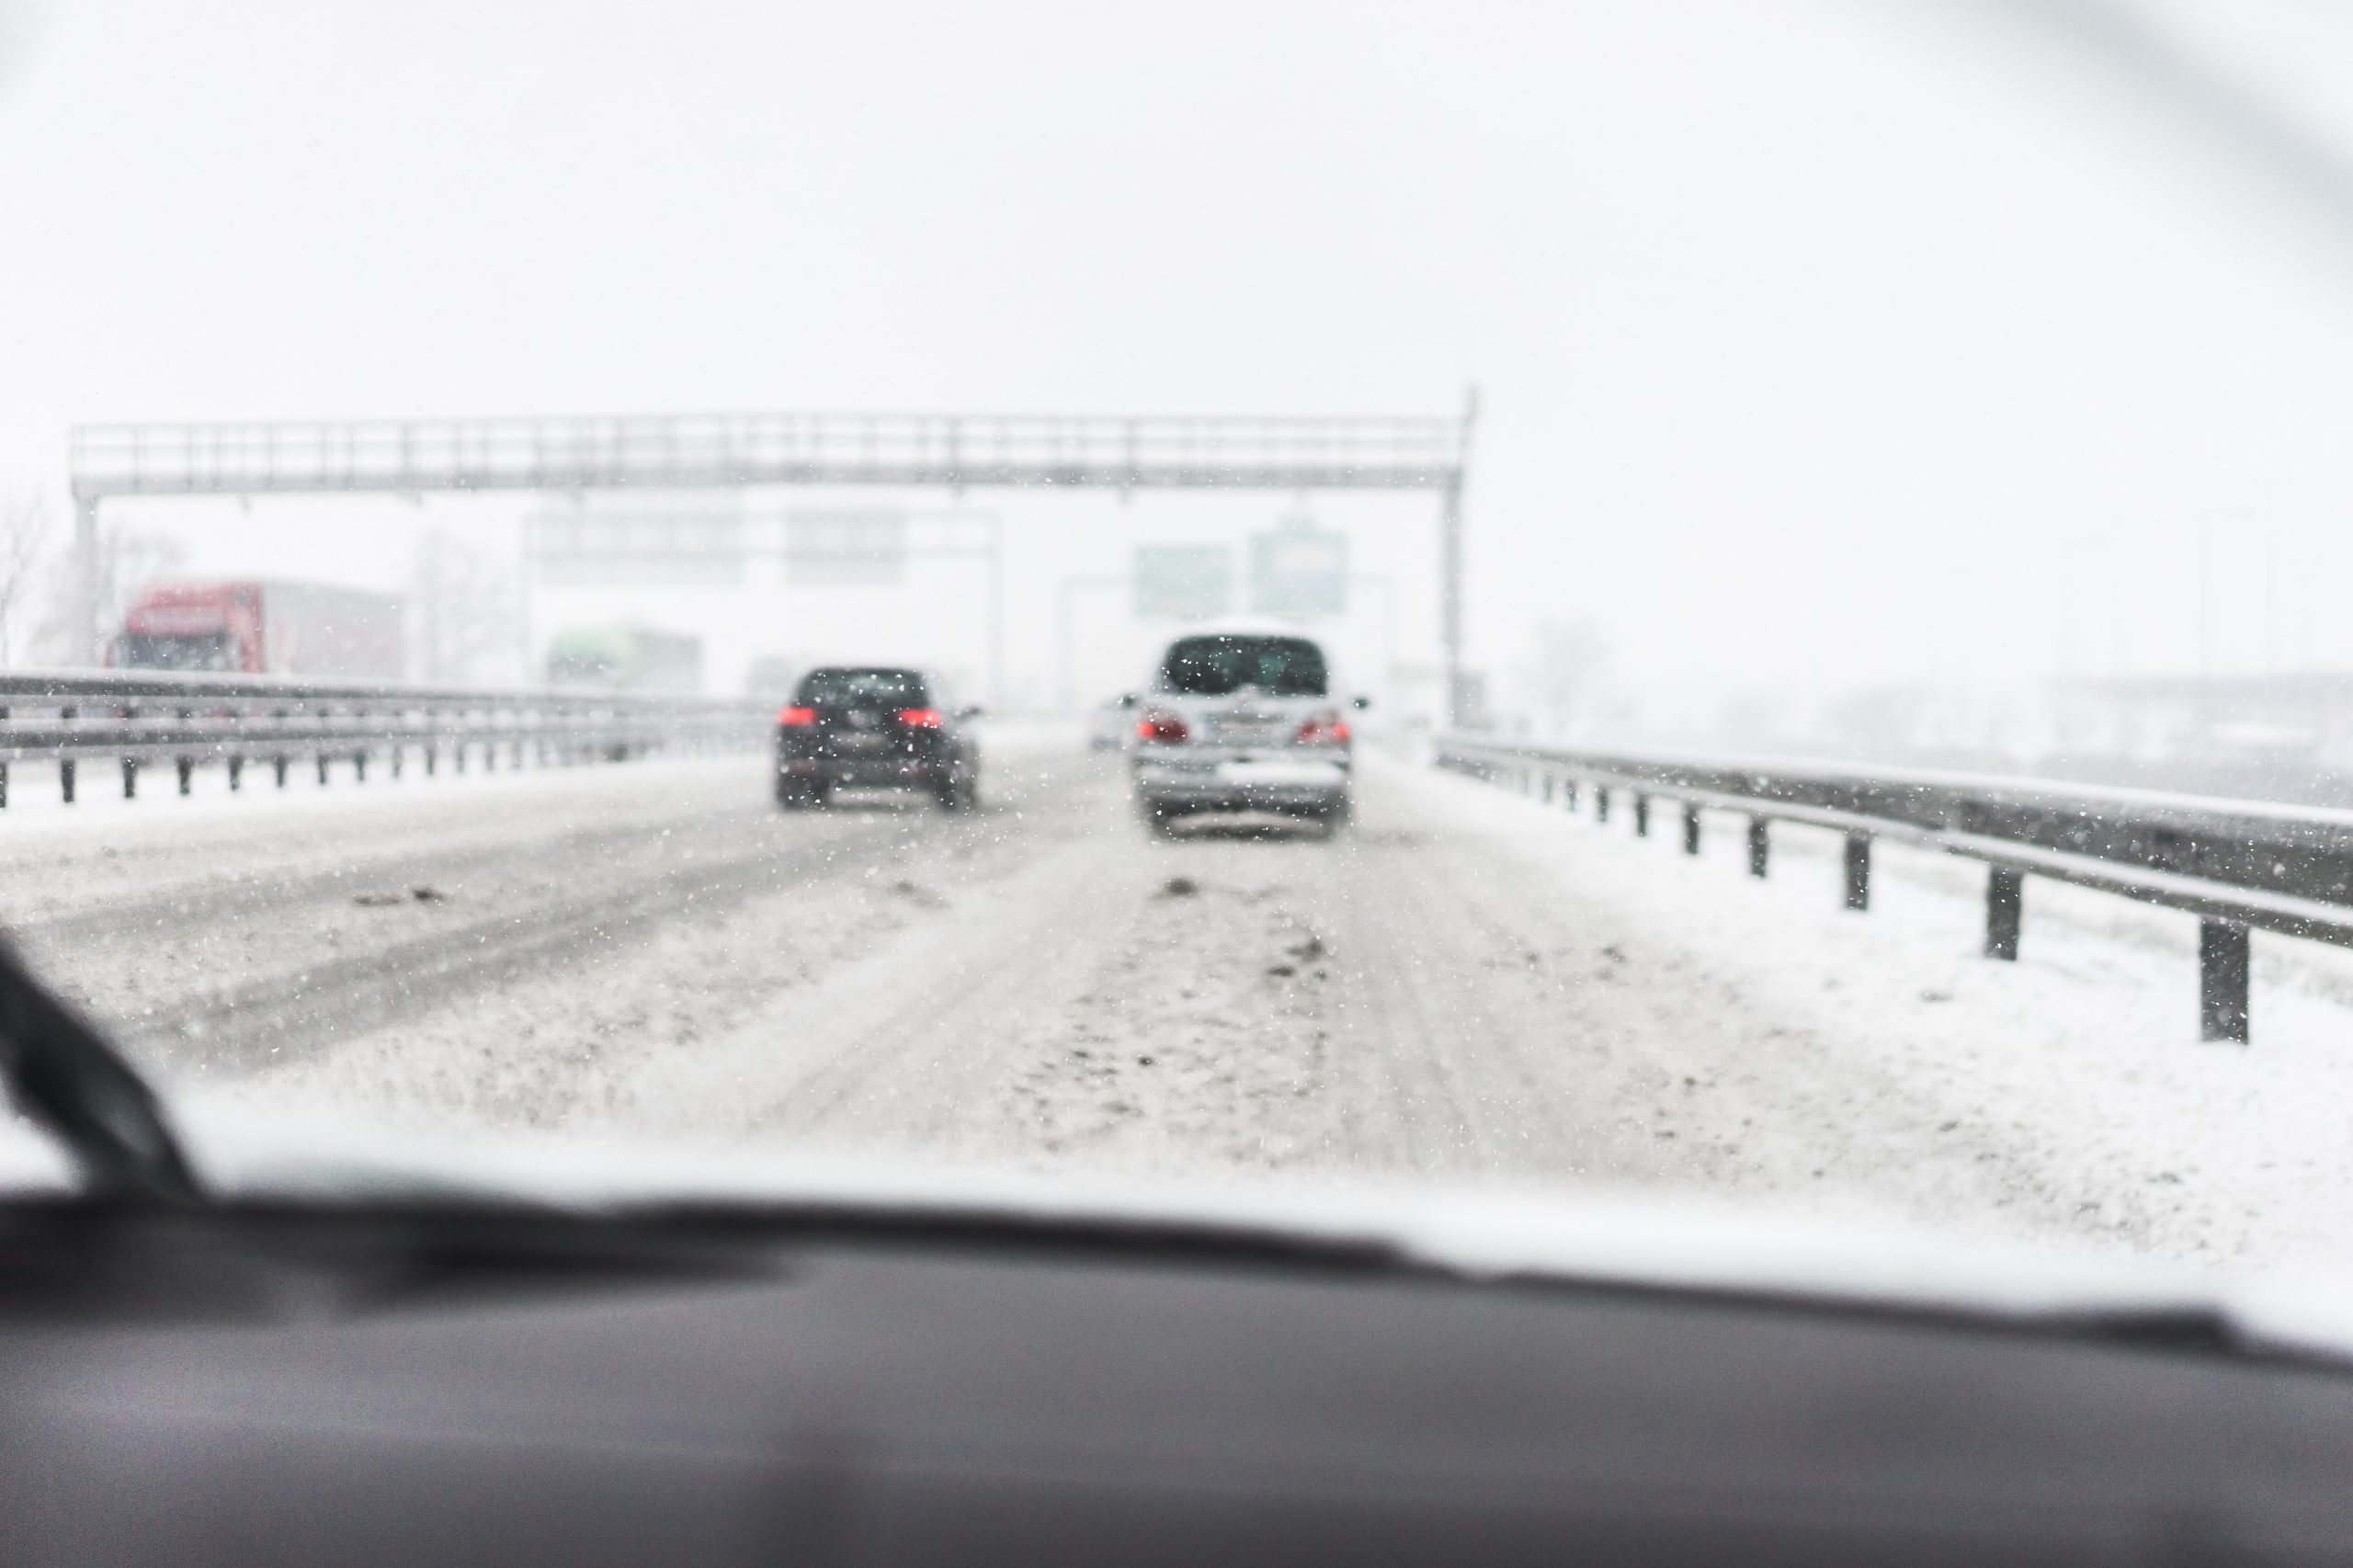 Winter safety and insurance coverage